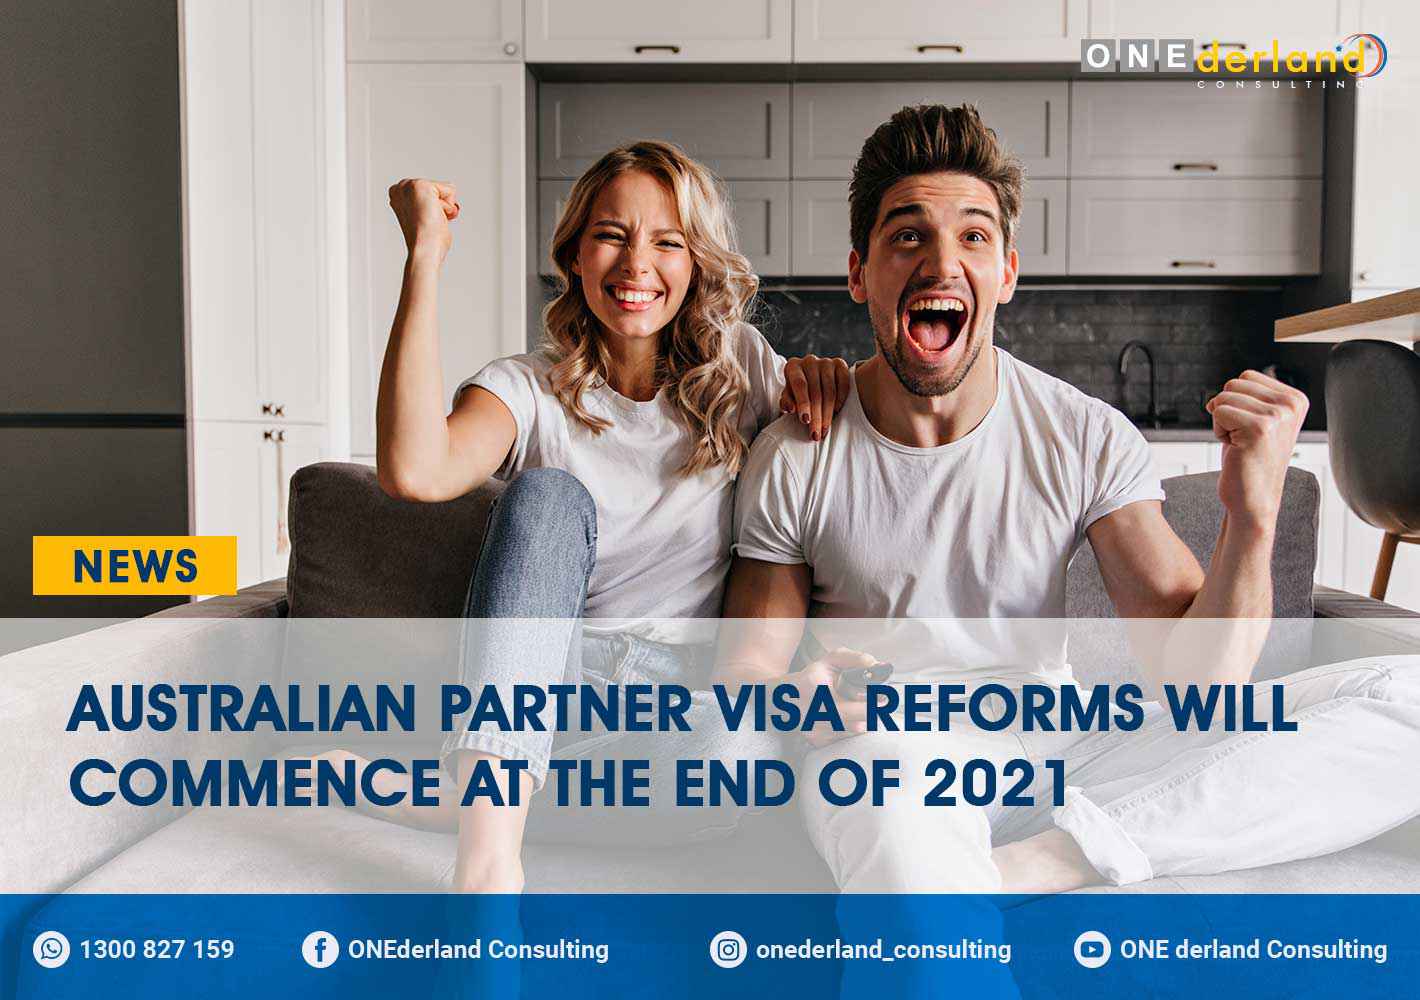 Australian Partner Visa Reforms Will Commence At The End Of 2021